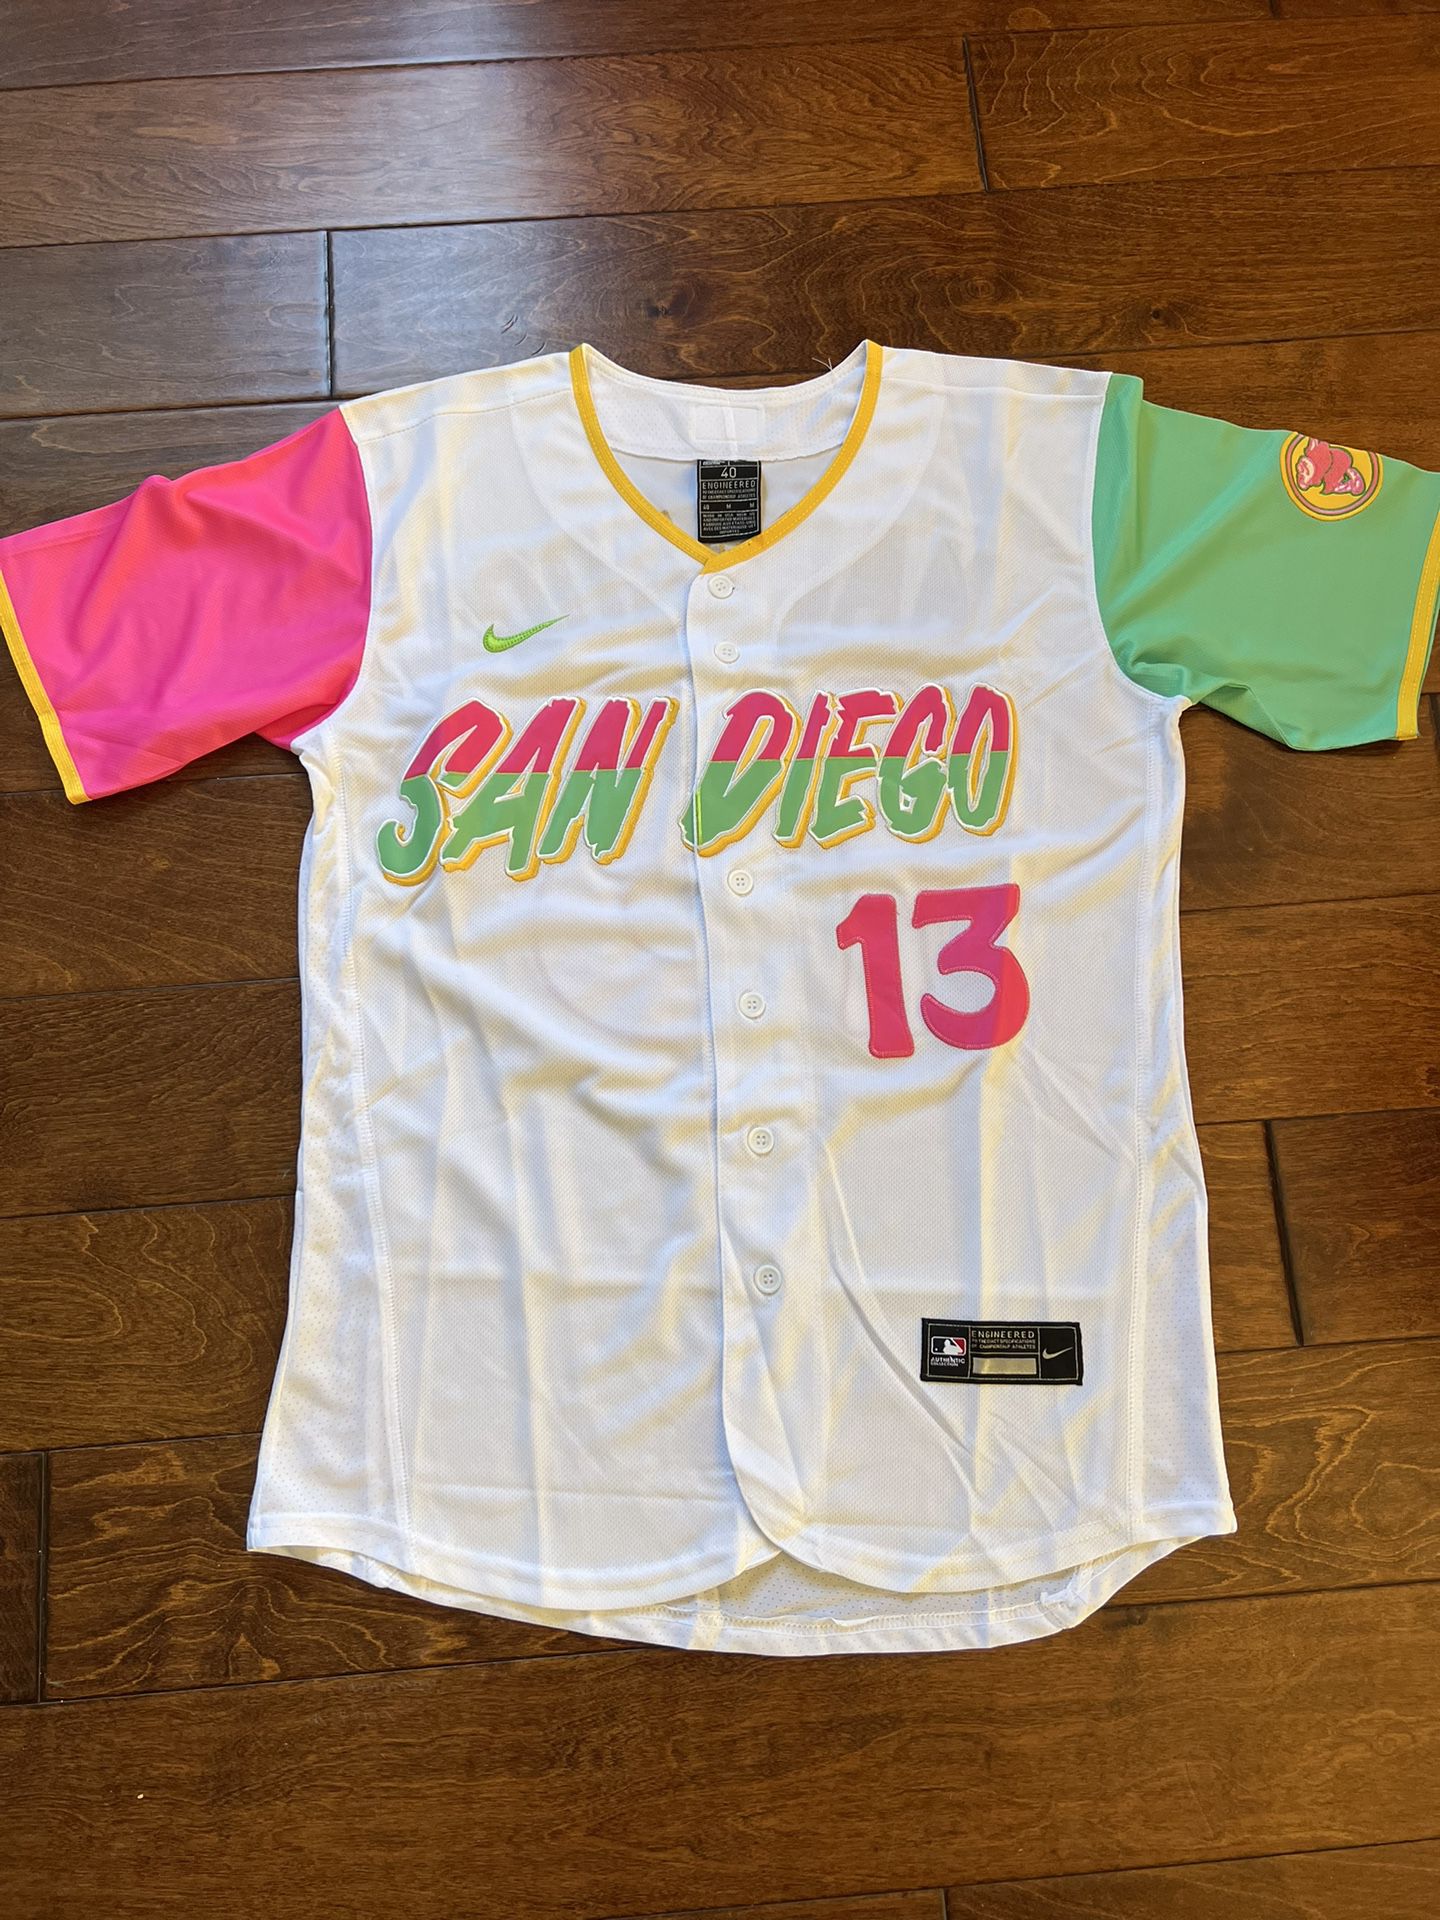 San Diego Padres City Connect Baseball Jerseys for Sale in Lemon